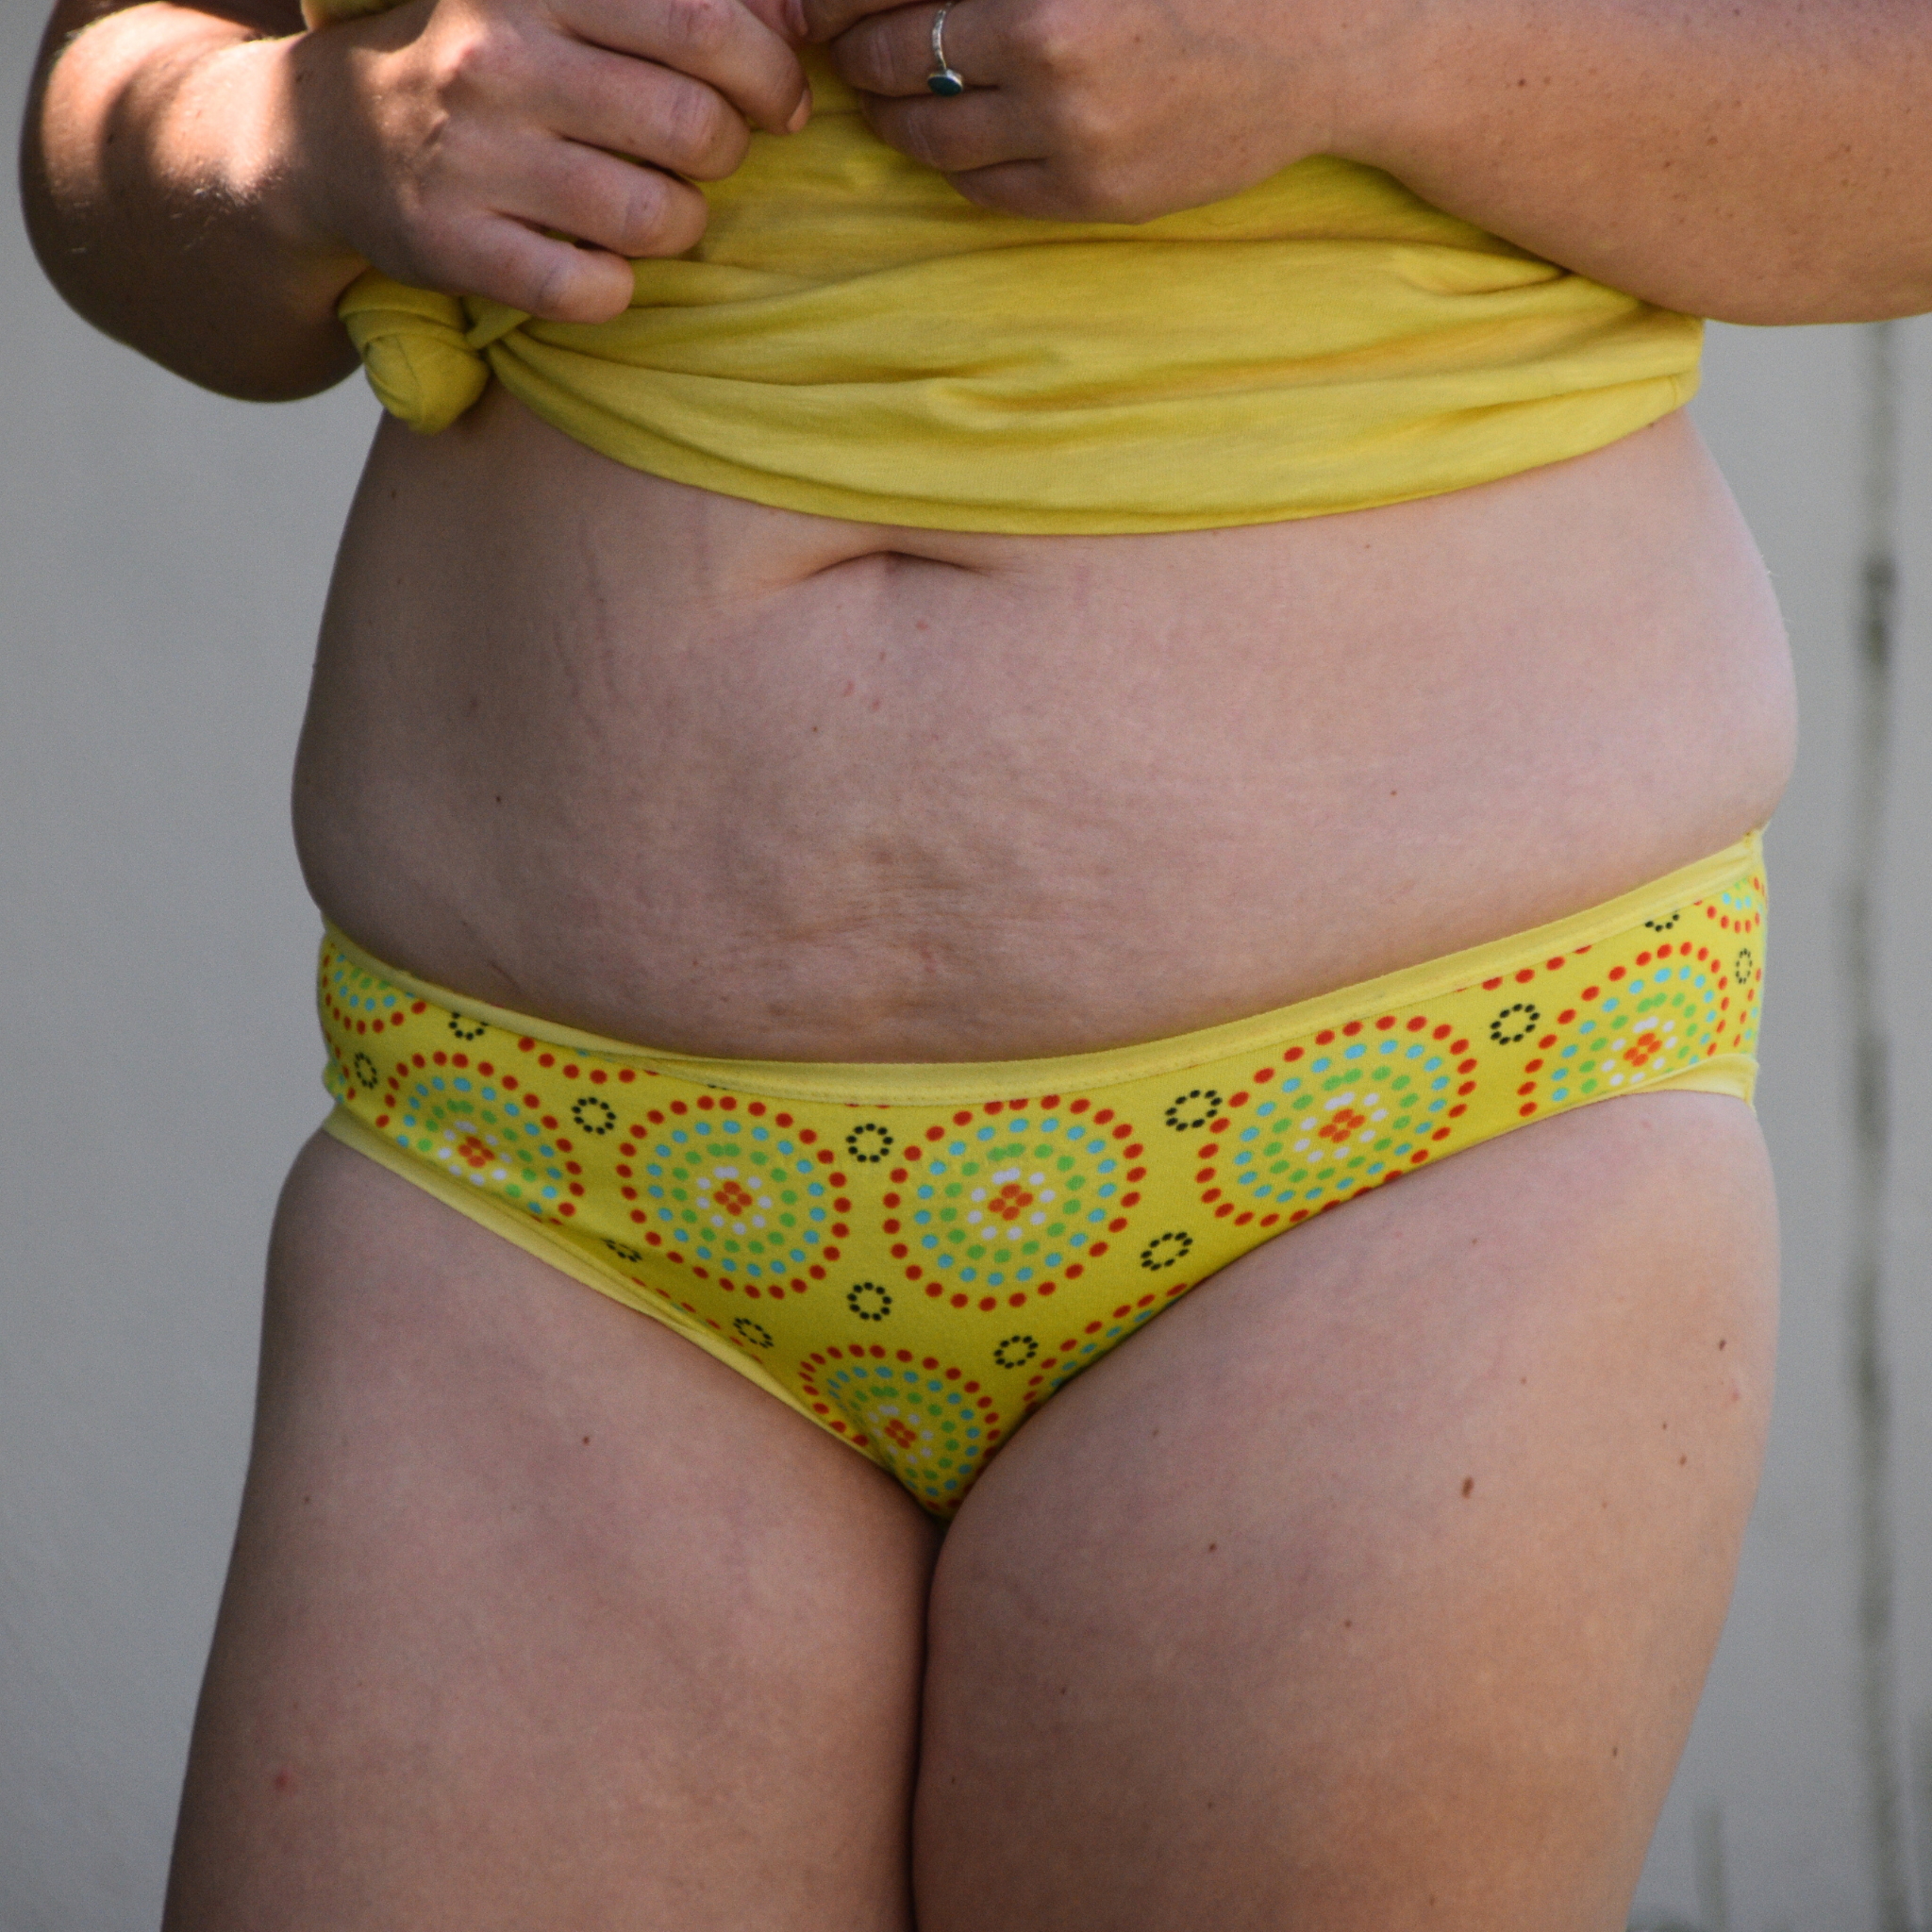 A person is shown from the midsection down, wearing a yellow shirt tied above the waist and yellow underwear with African inspired prints. The person's hands are holding the knot of the shirt.